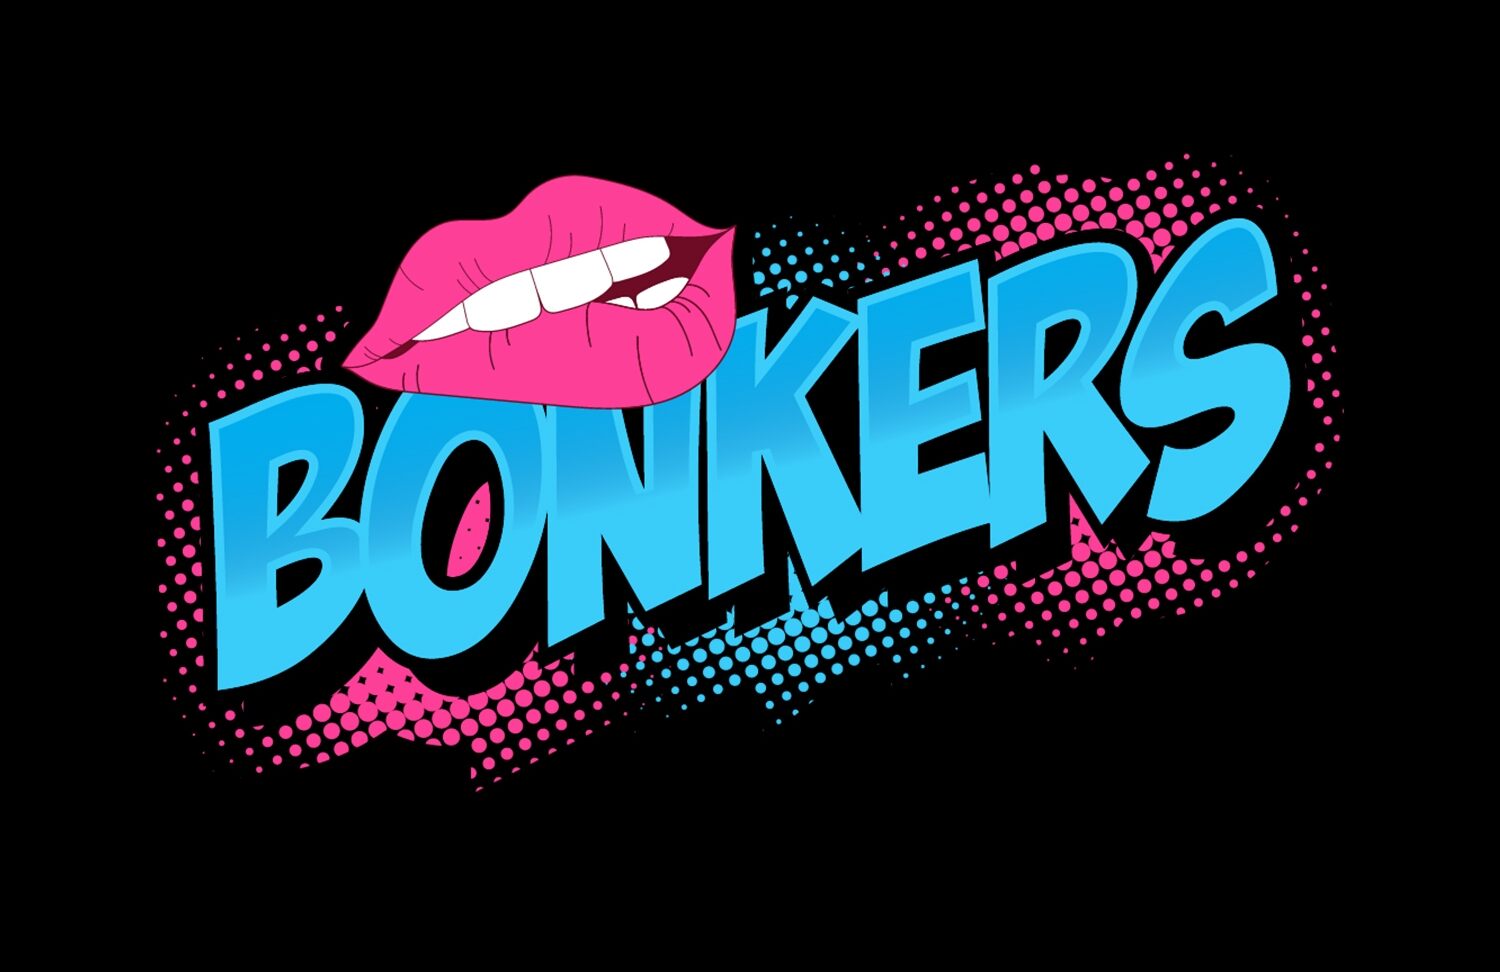 Bonkers – A Dating App That Puts Safety First